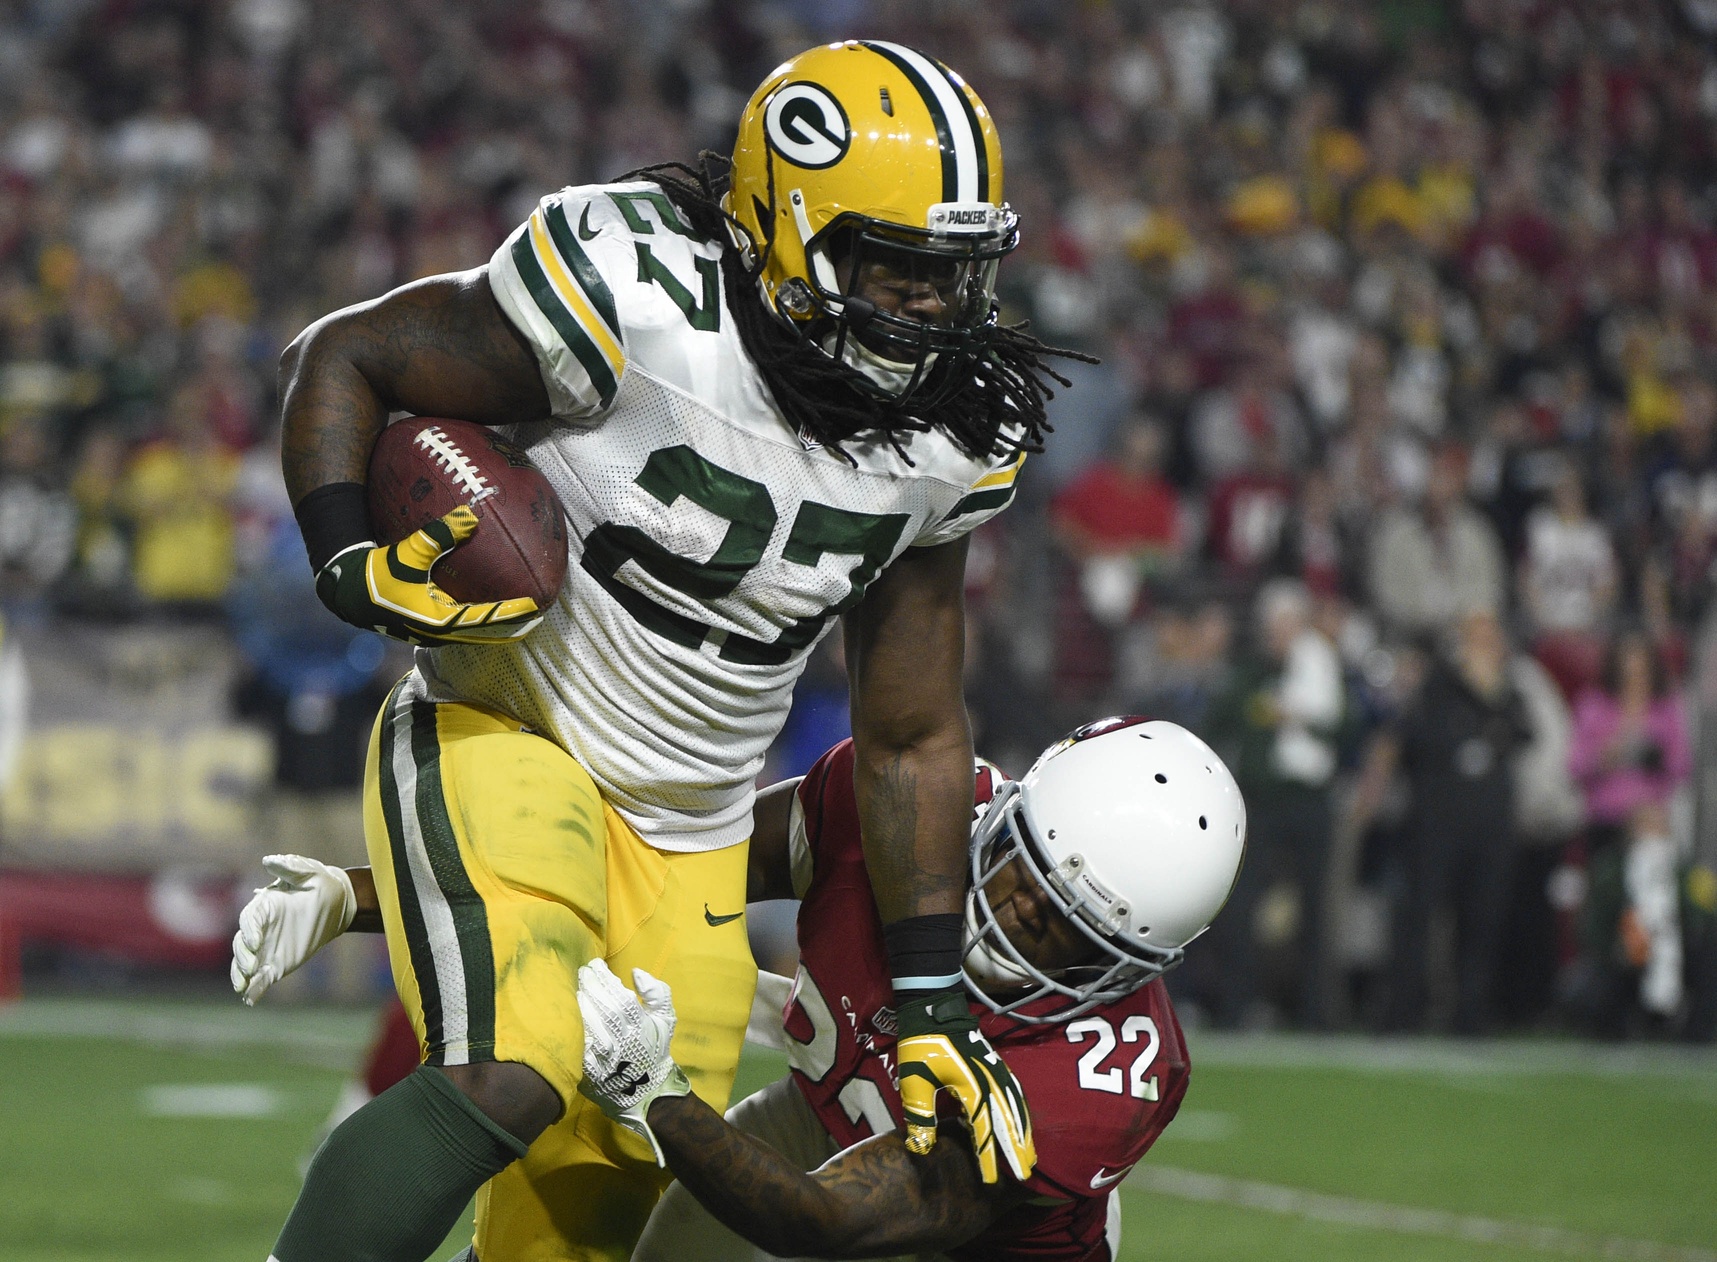 Packers rookie RB Eddie Lacy might have put on a few pounds in the offseason